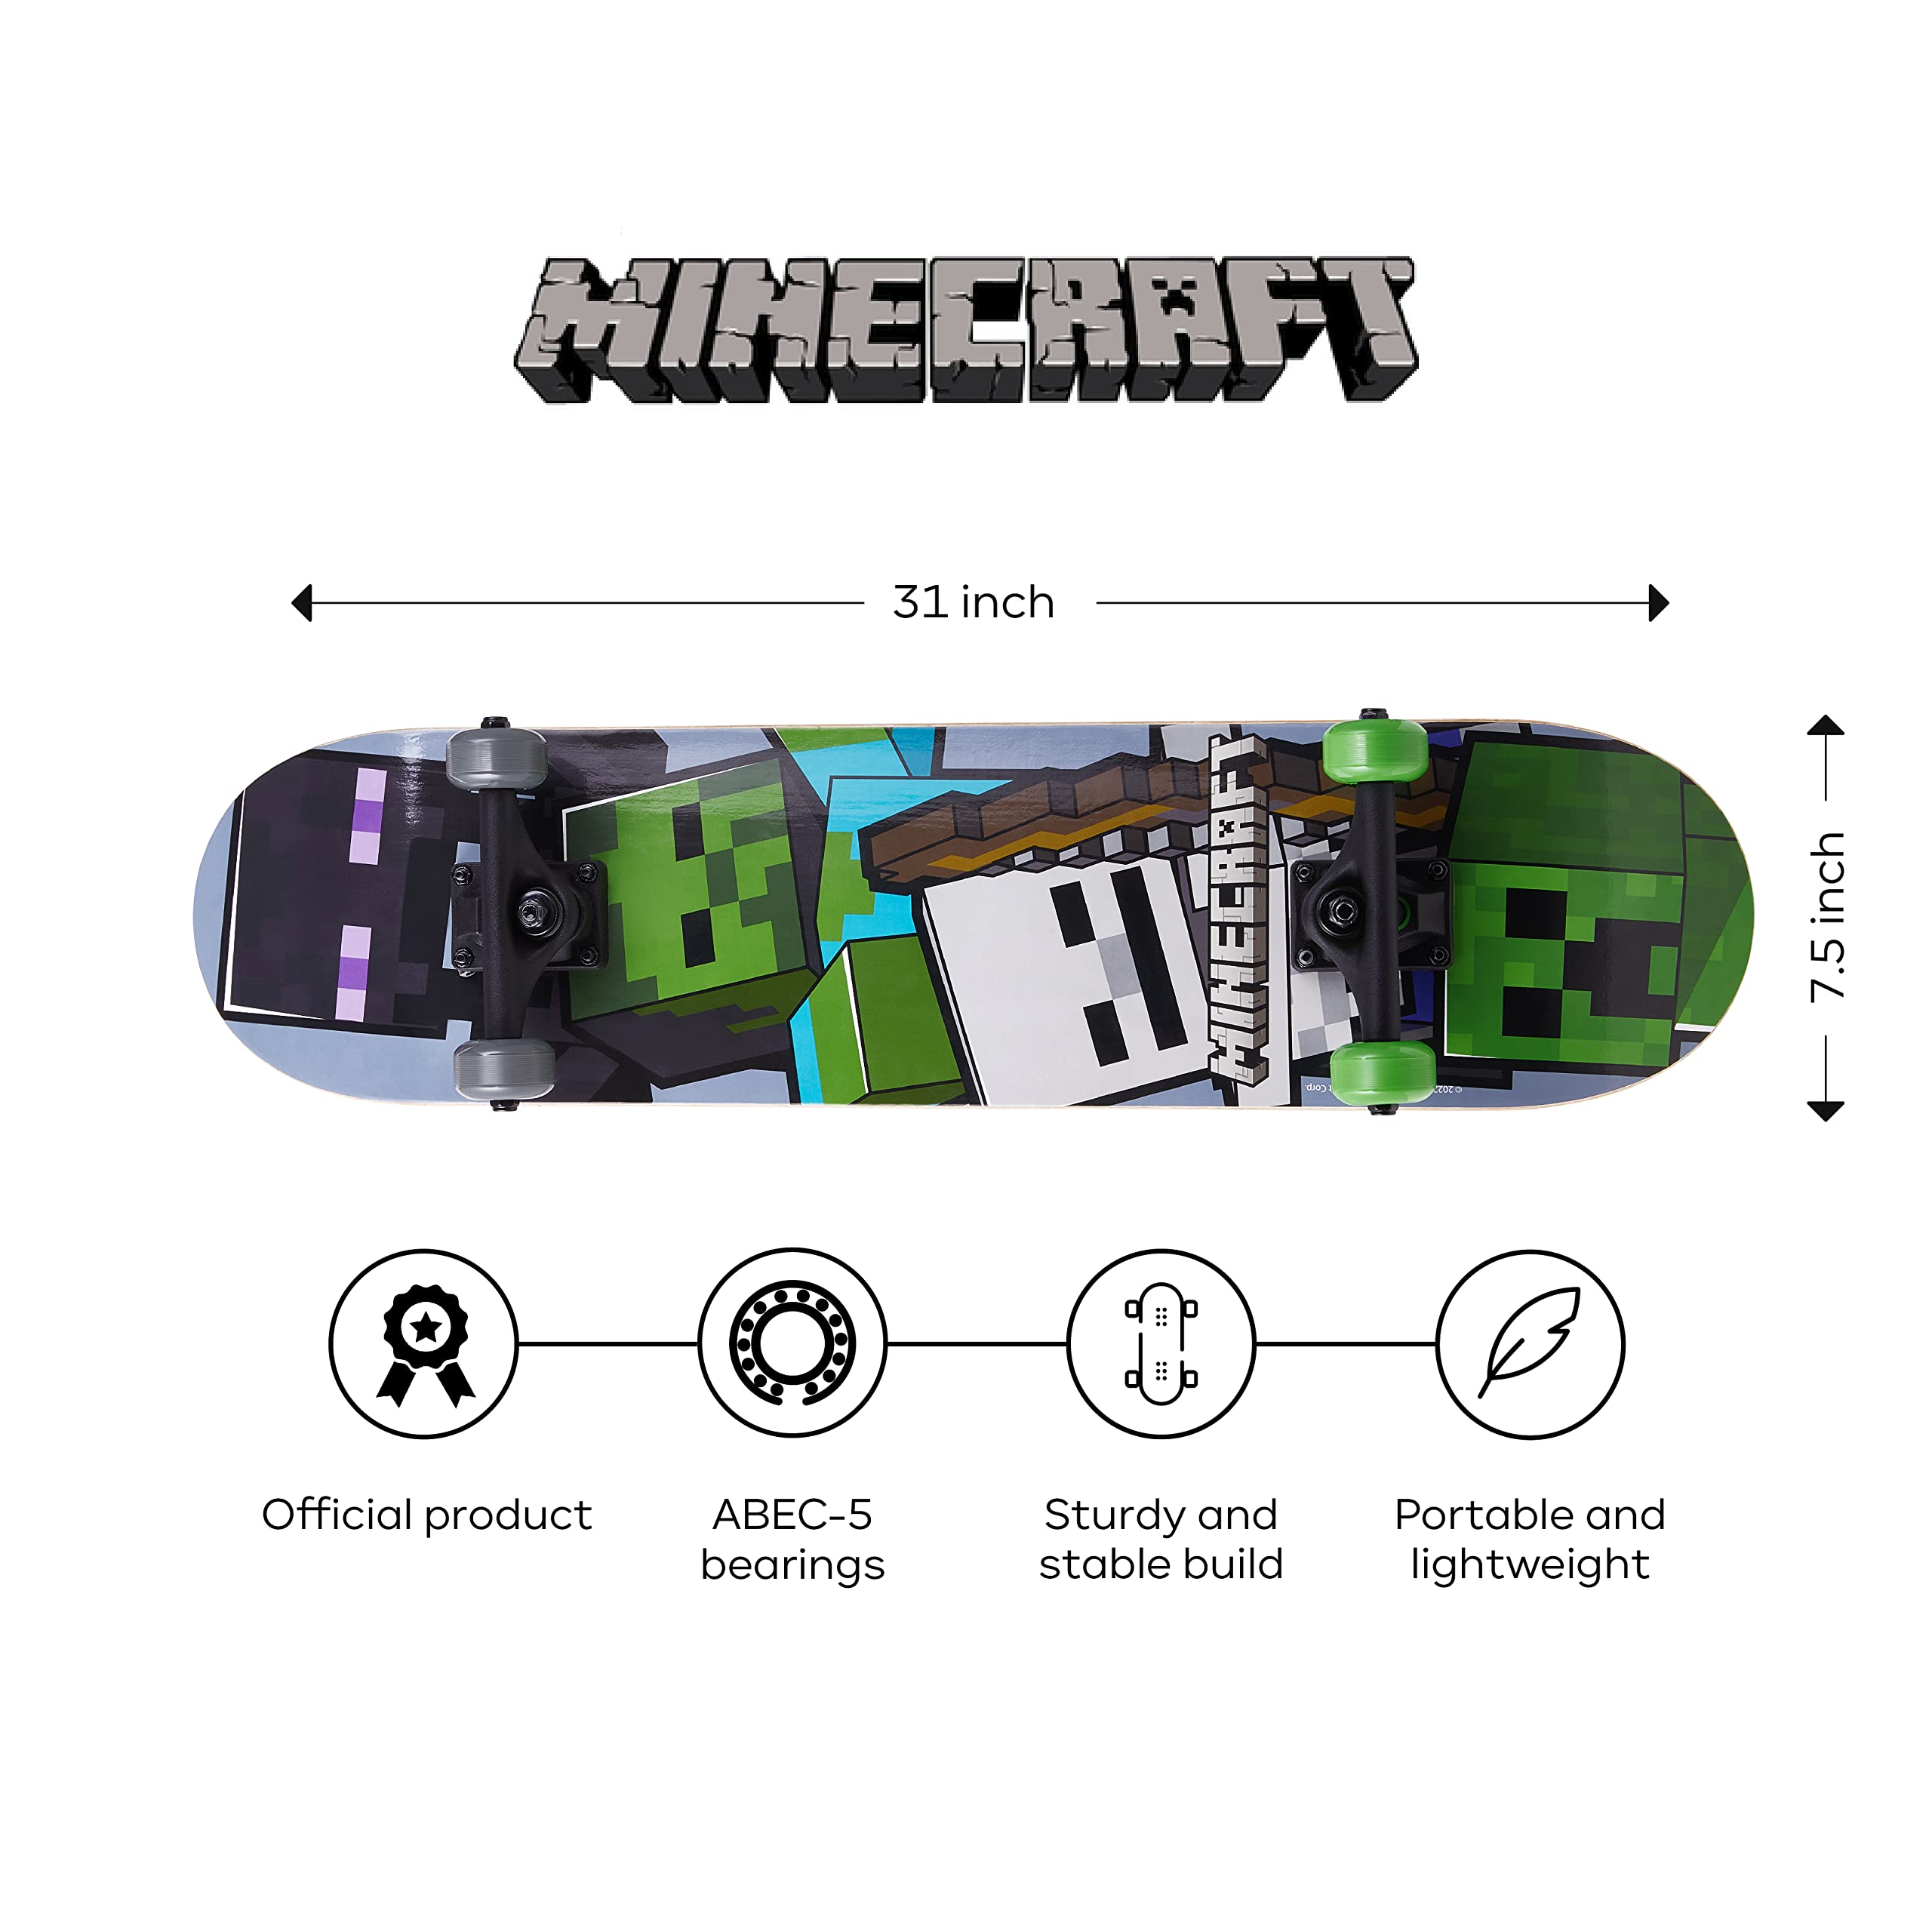 Minecraft 31 inch Skateboard, 9-ply Maple Deck Skate Board for Cruising, Carving, Tricks and Downhill